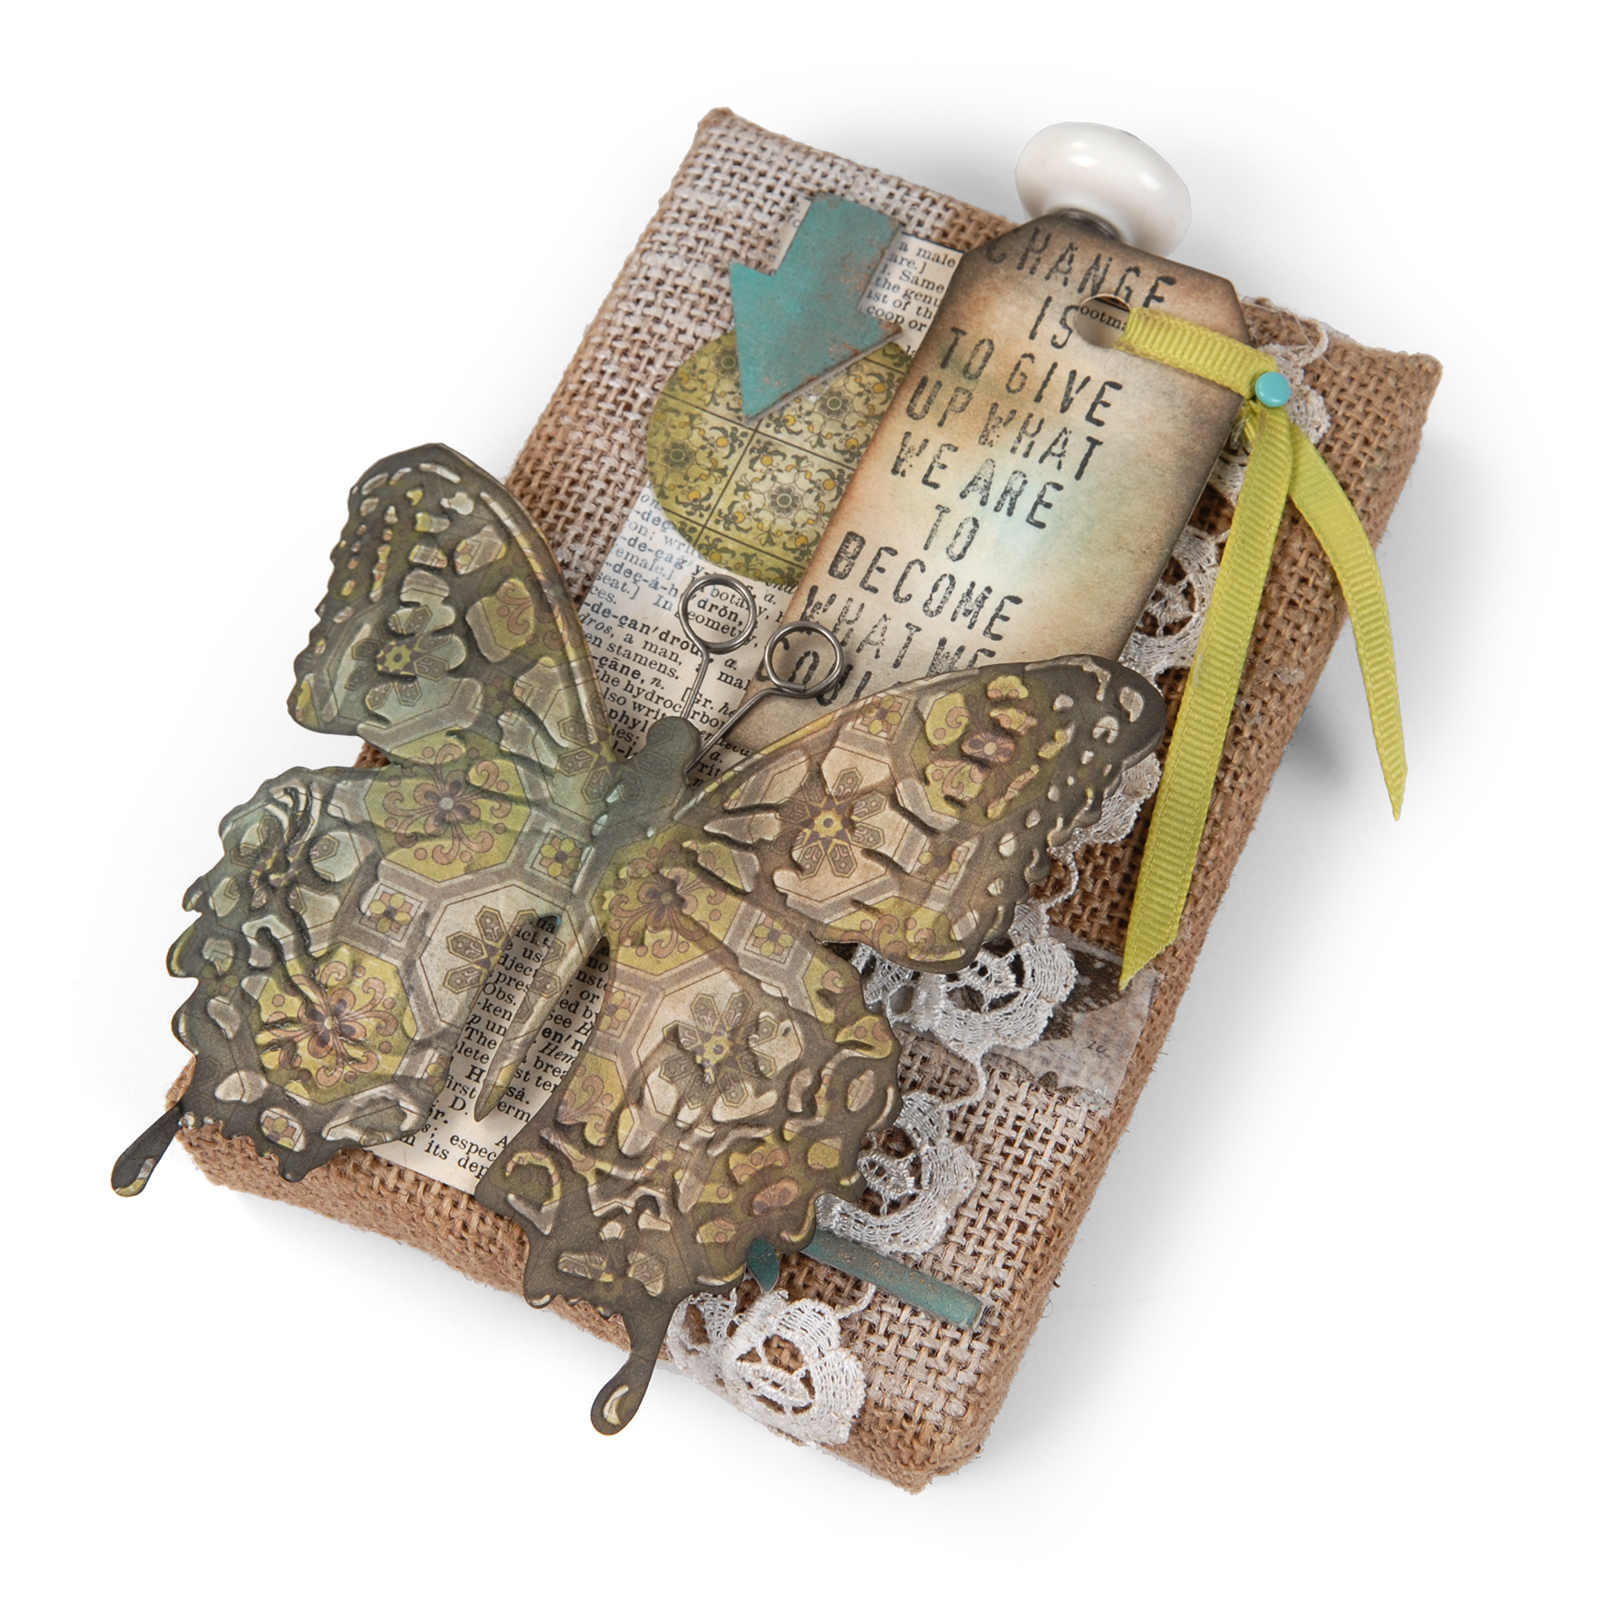 Tim Holtz July Releases Further Drive Creativity for Sizzix